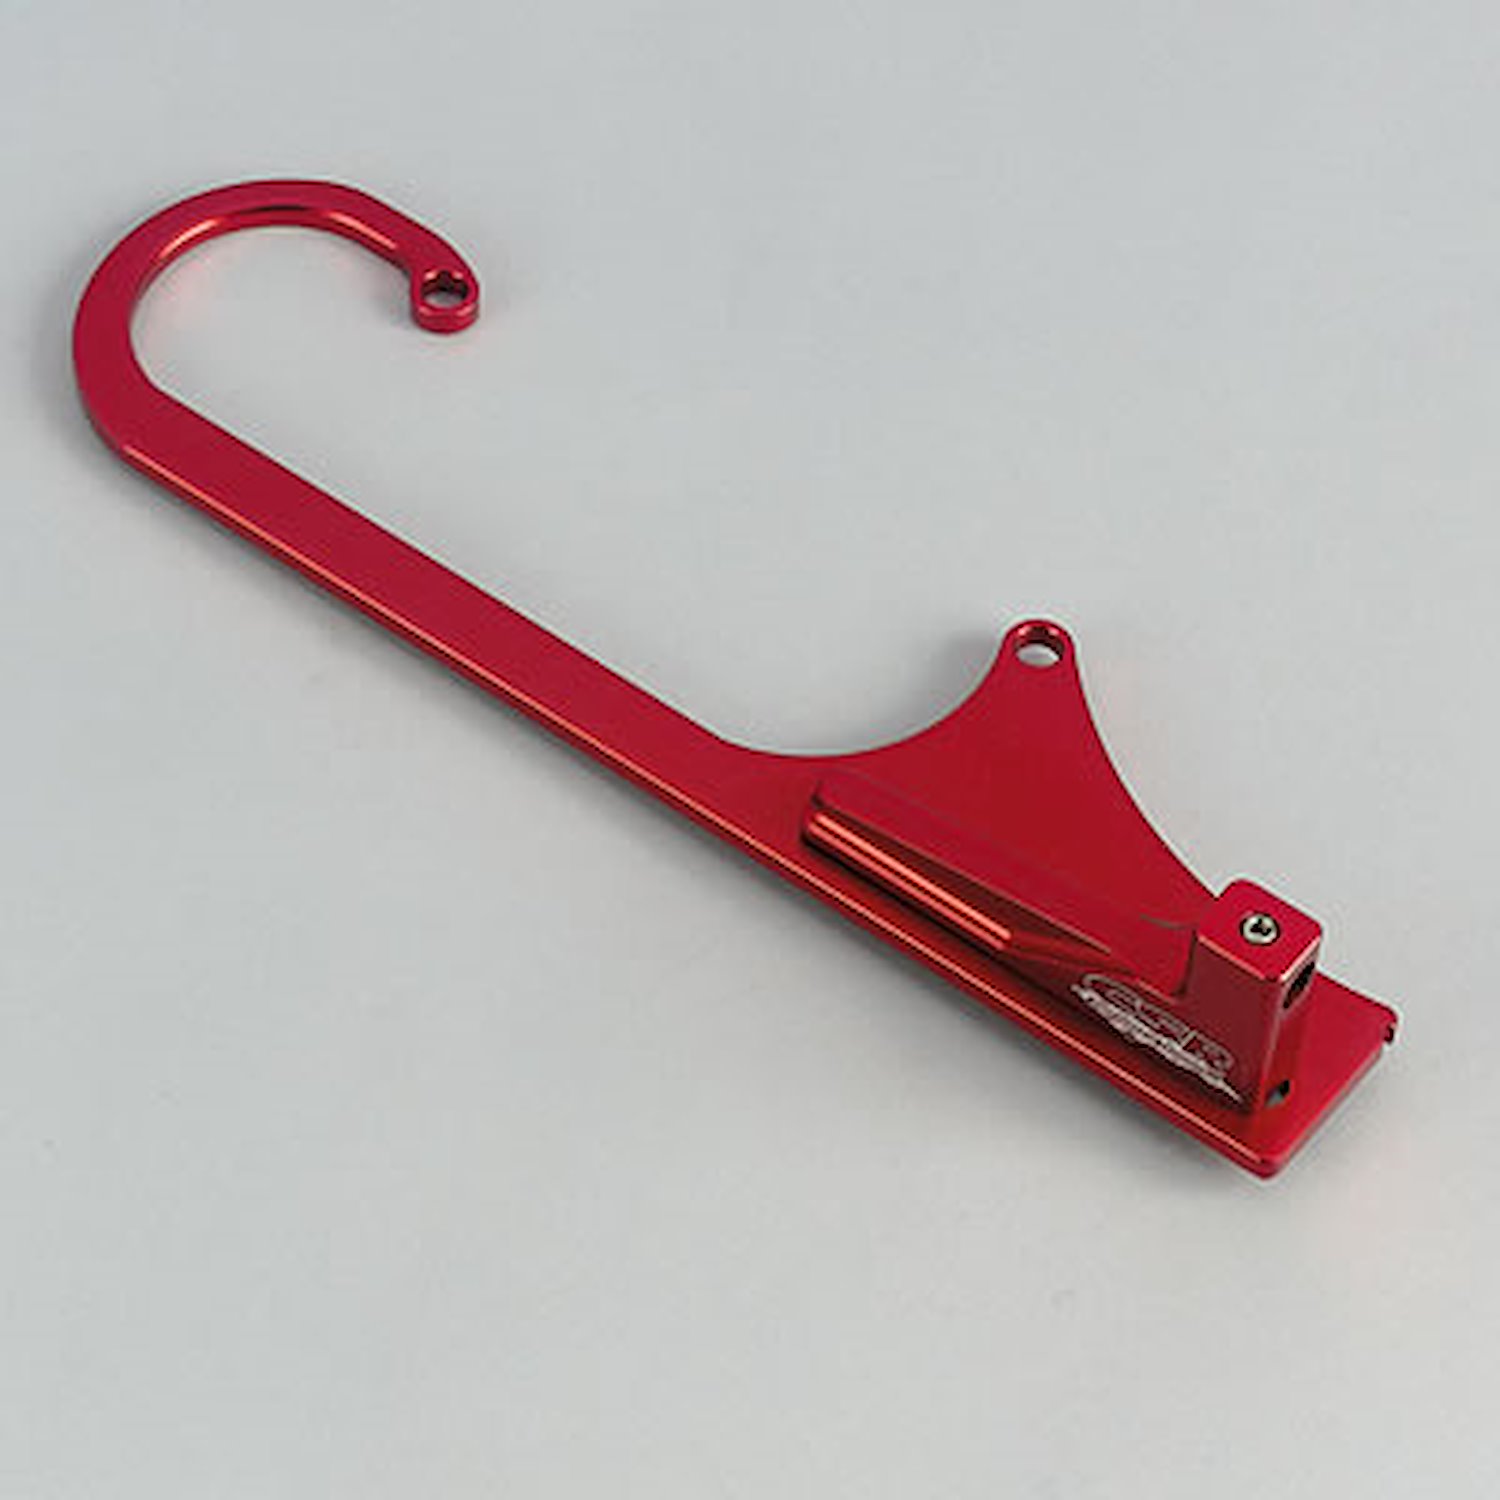 Adjustable Throttle Cable Bracket -Red Fits 4150/3310 Series Holley 750 with GM Snap in Cable